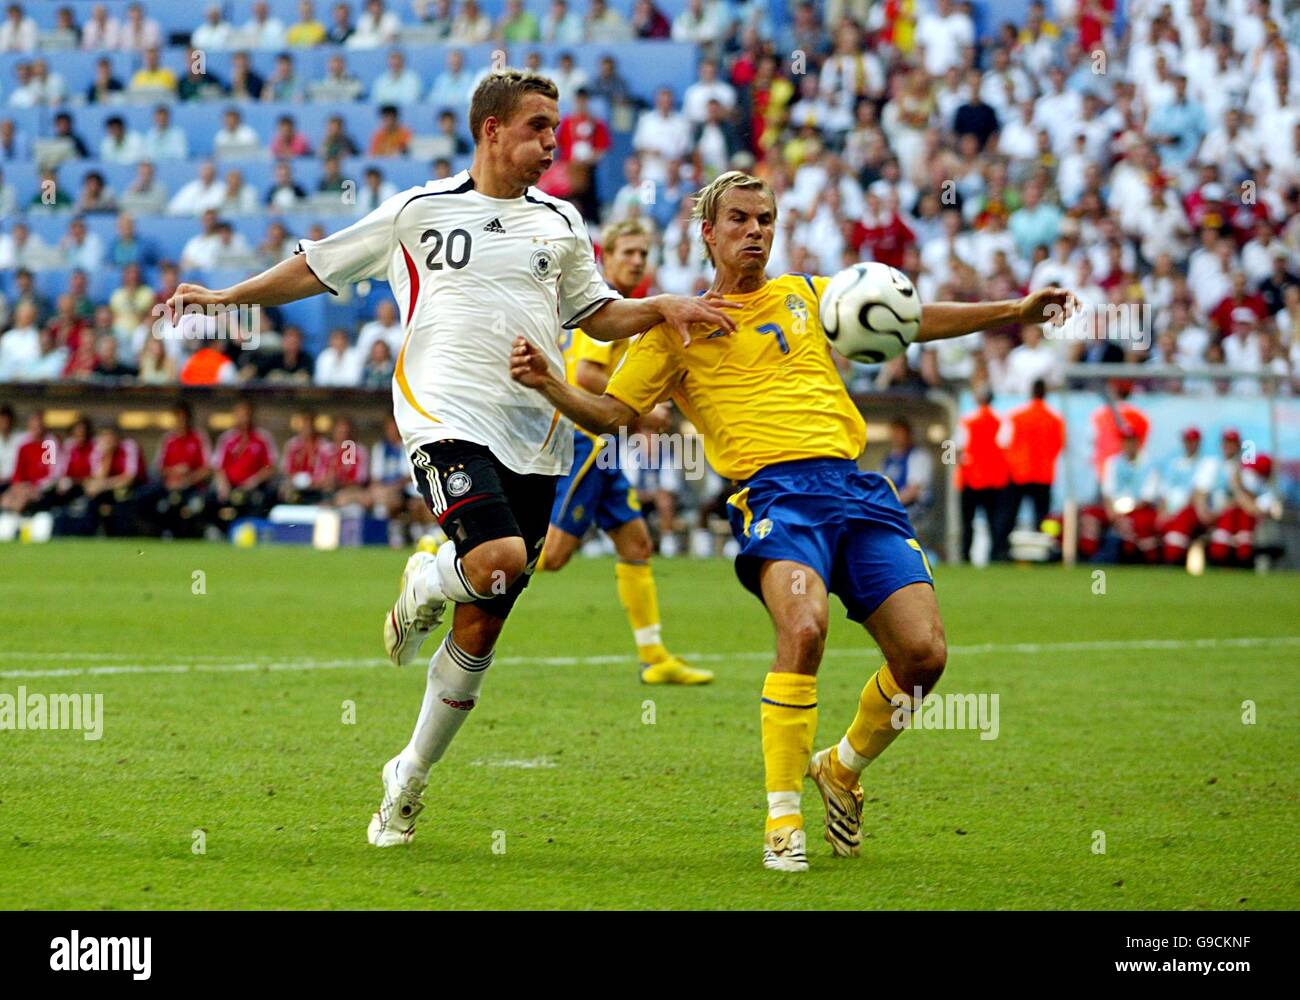 Soccer - 2006 FIFA World Cup Germany - Second Round - Germany v Sweden - Allianz Arena. Germany's Lukas Podolski (l) and Sweden's Niclas Alexandersson battle for the ball Stock Photo